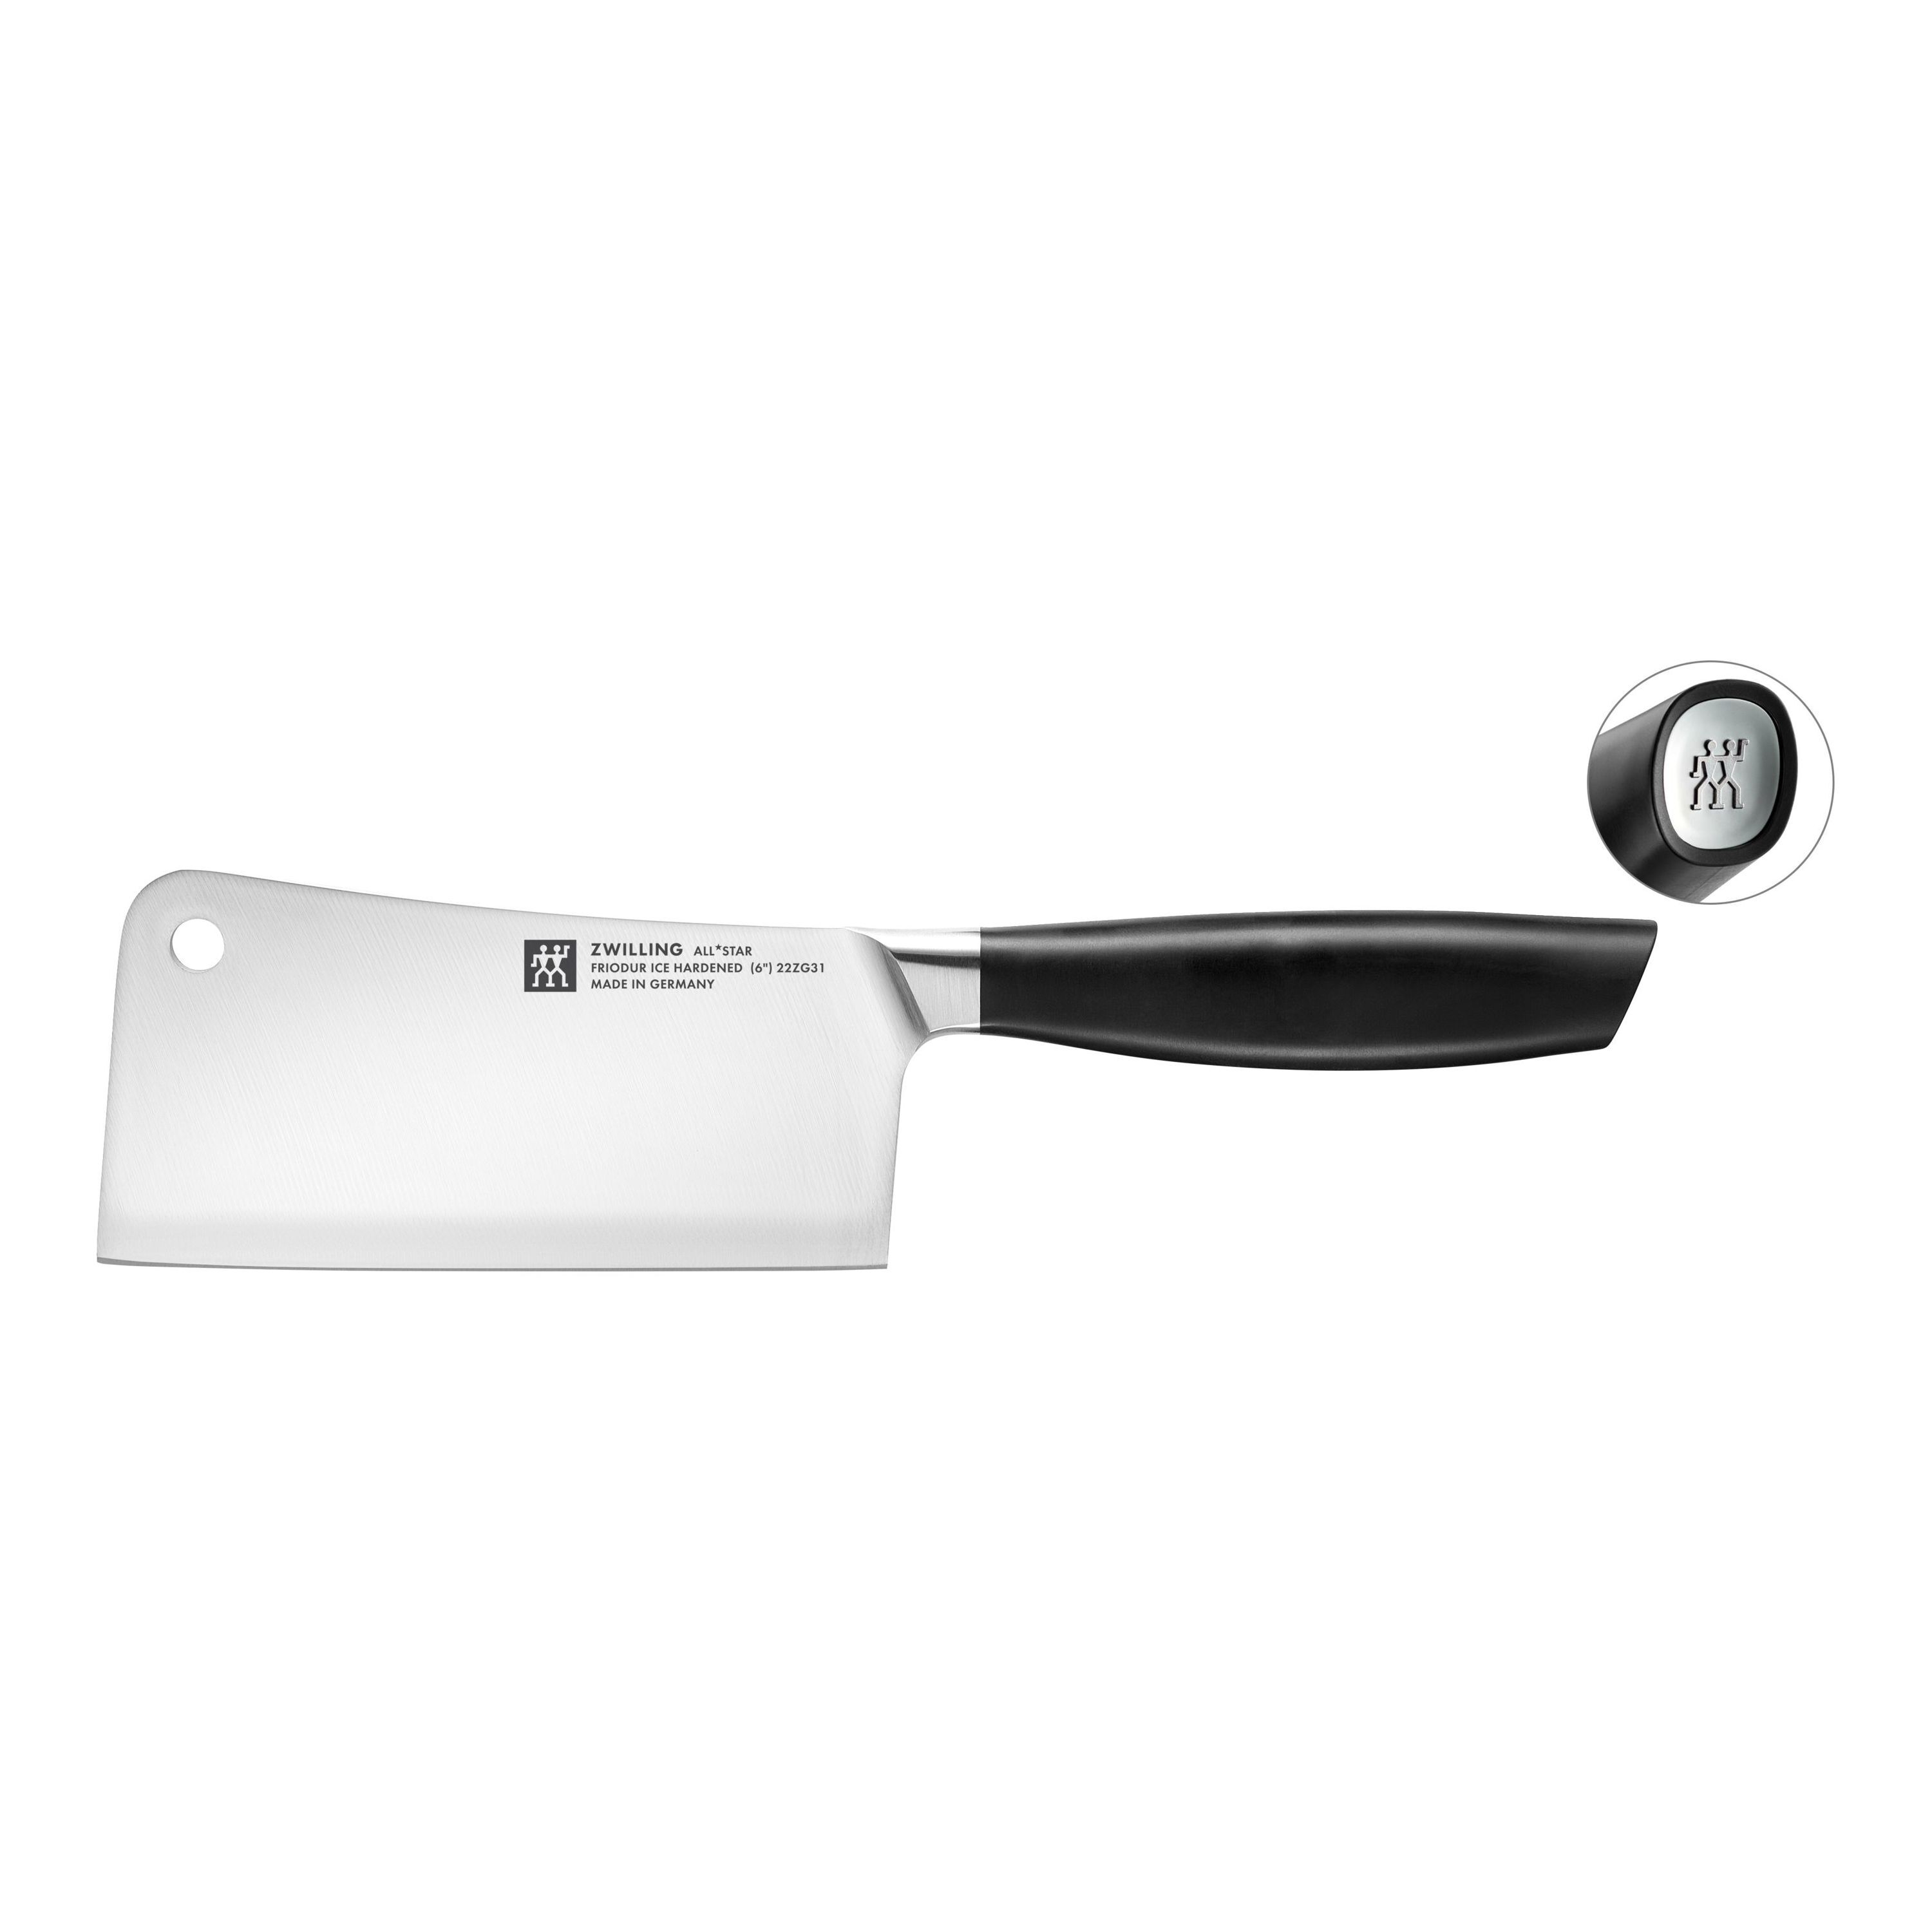 Buy ZWILLING All * Star Chinese chef's knife | ZWILLING.COM